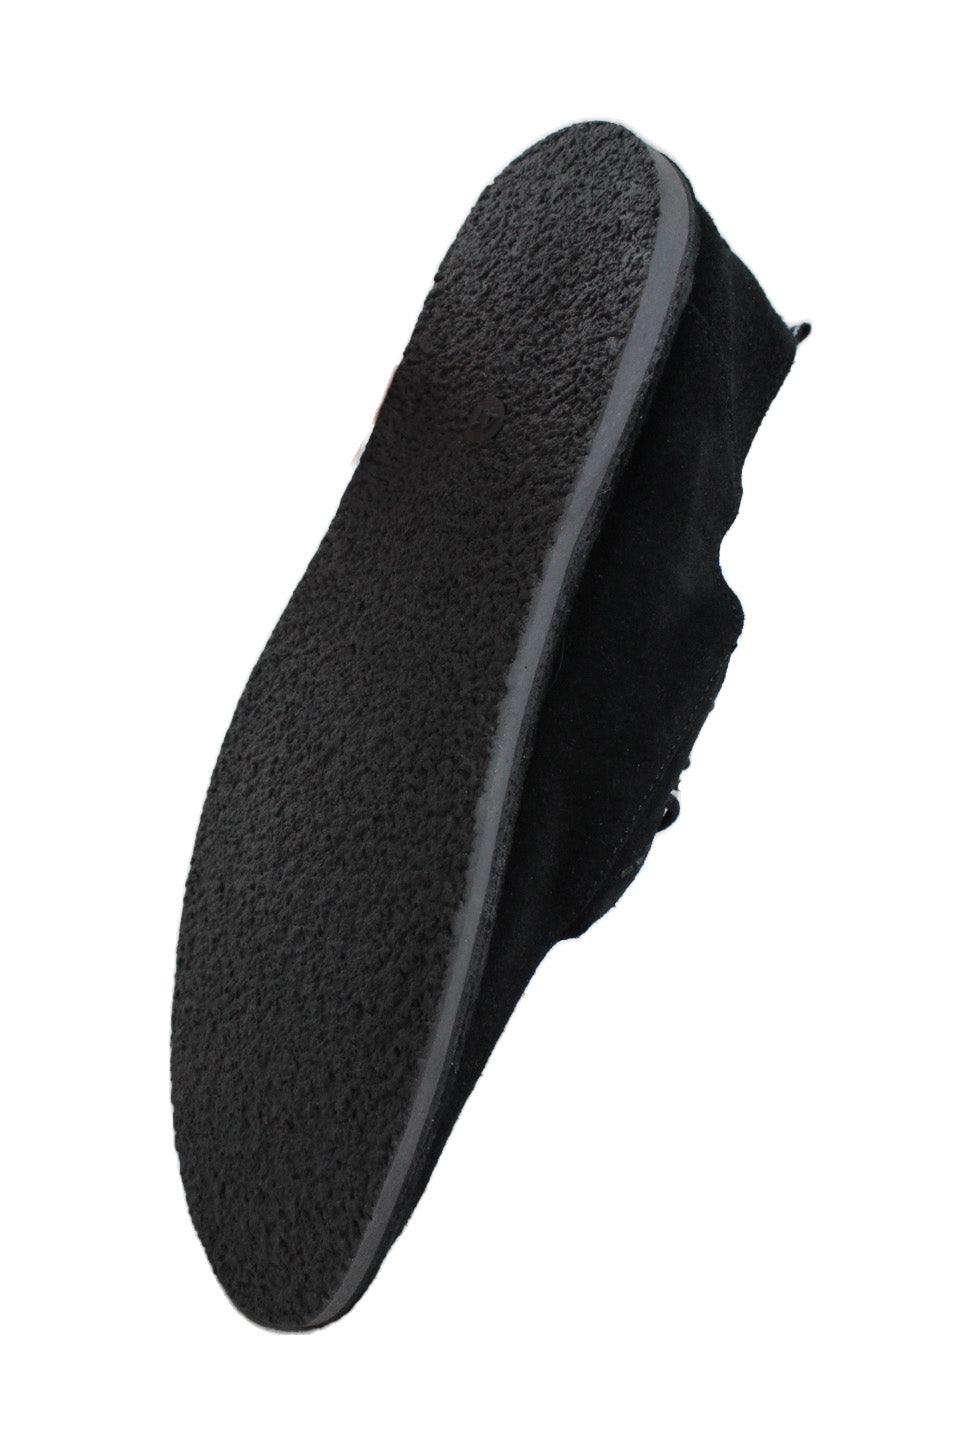 sole angle of shoe. crepe rubberized bottom of outsole, smooth on side of sole. text '41'. 